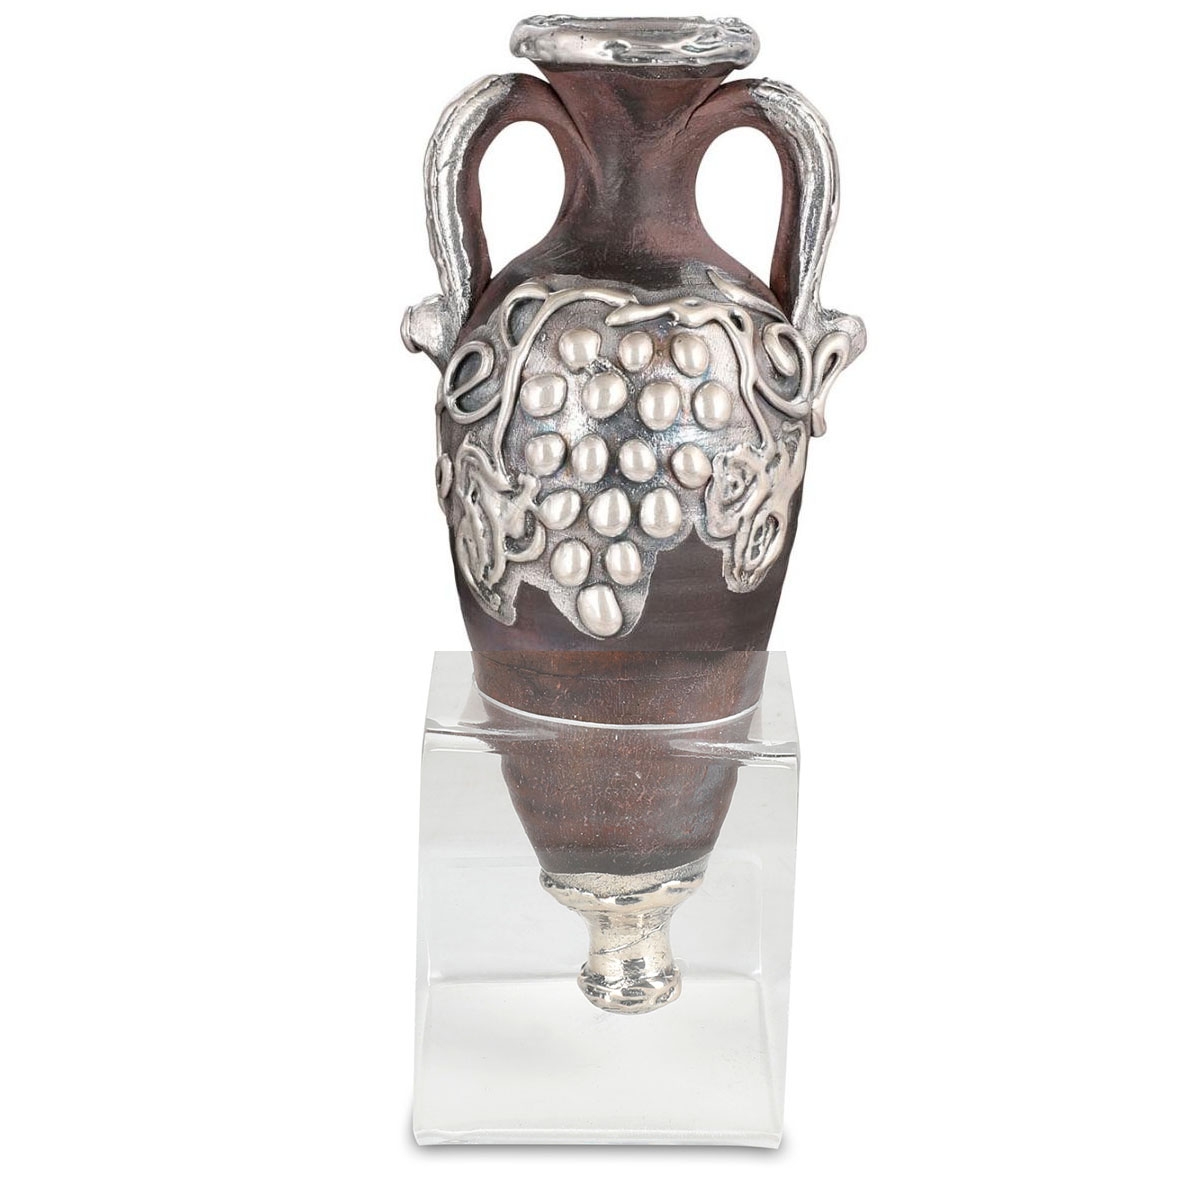 Tall Ancient Wine Vessel Ceramic with 925 Sterling Silver Decoration - 2